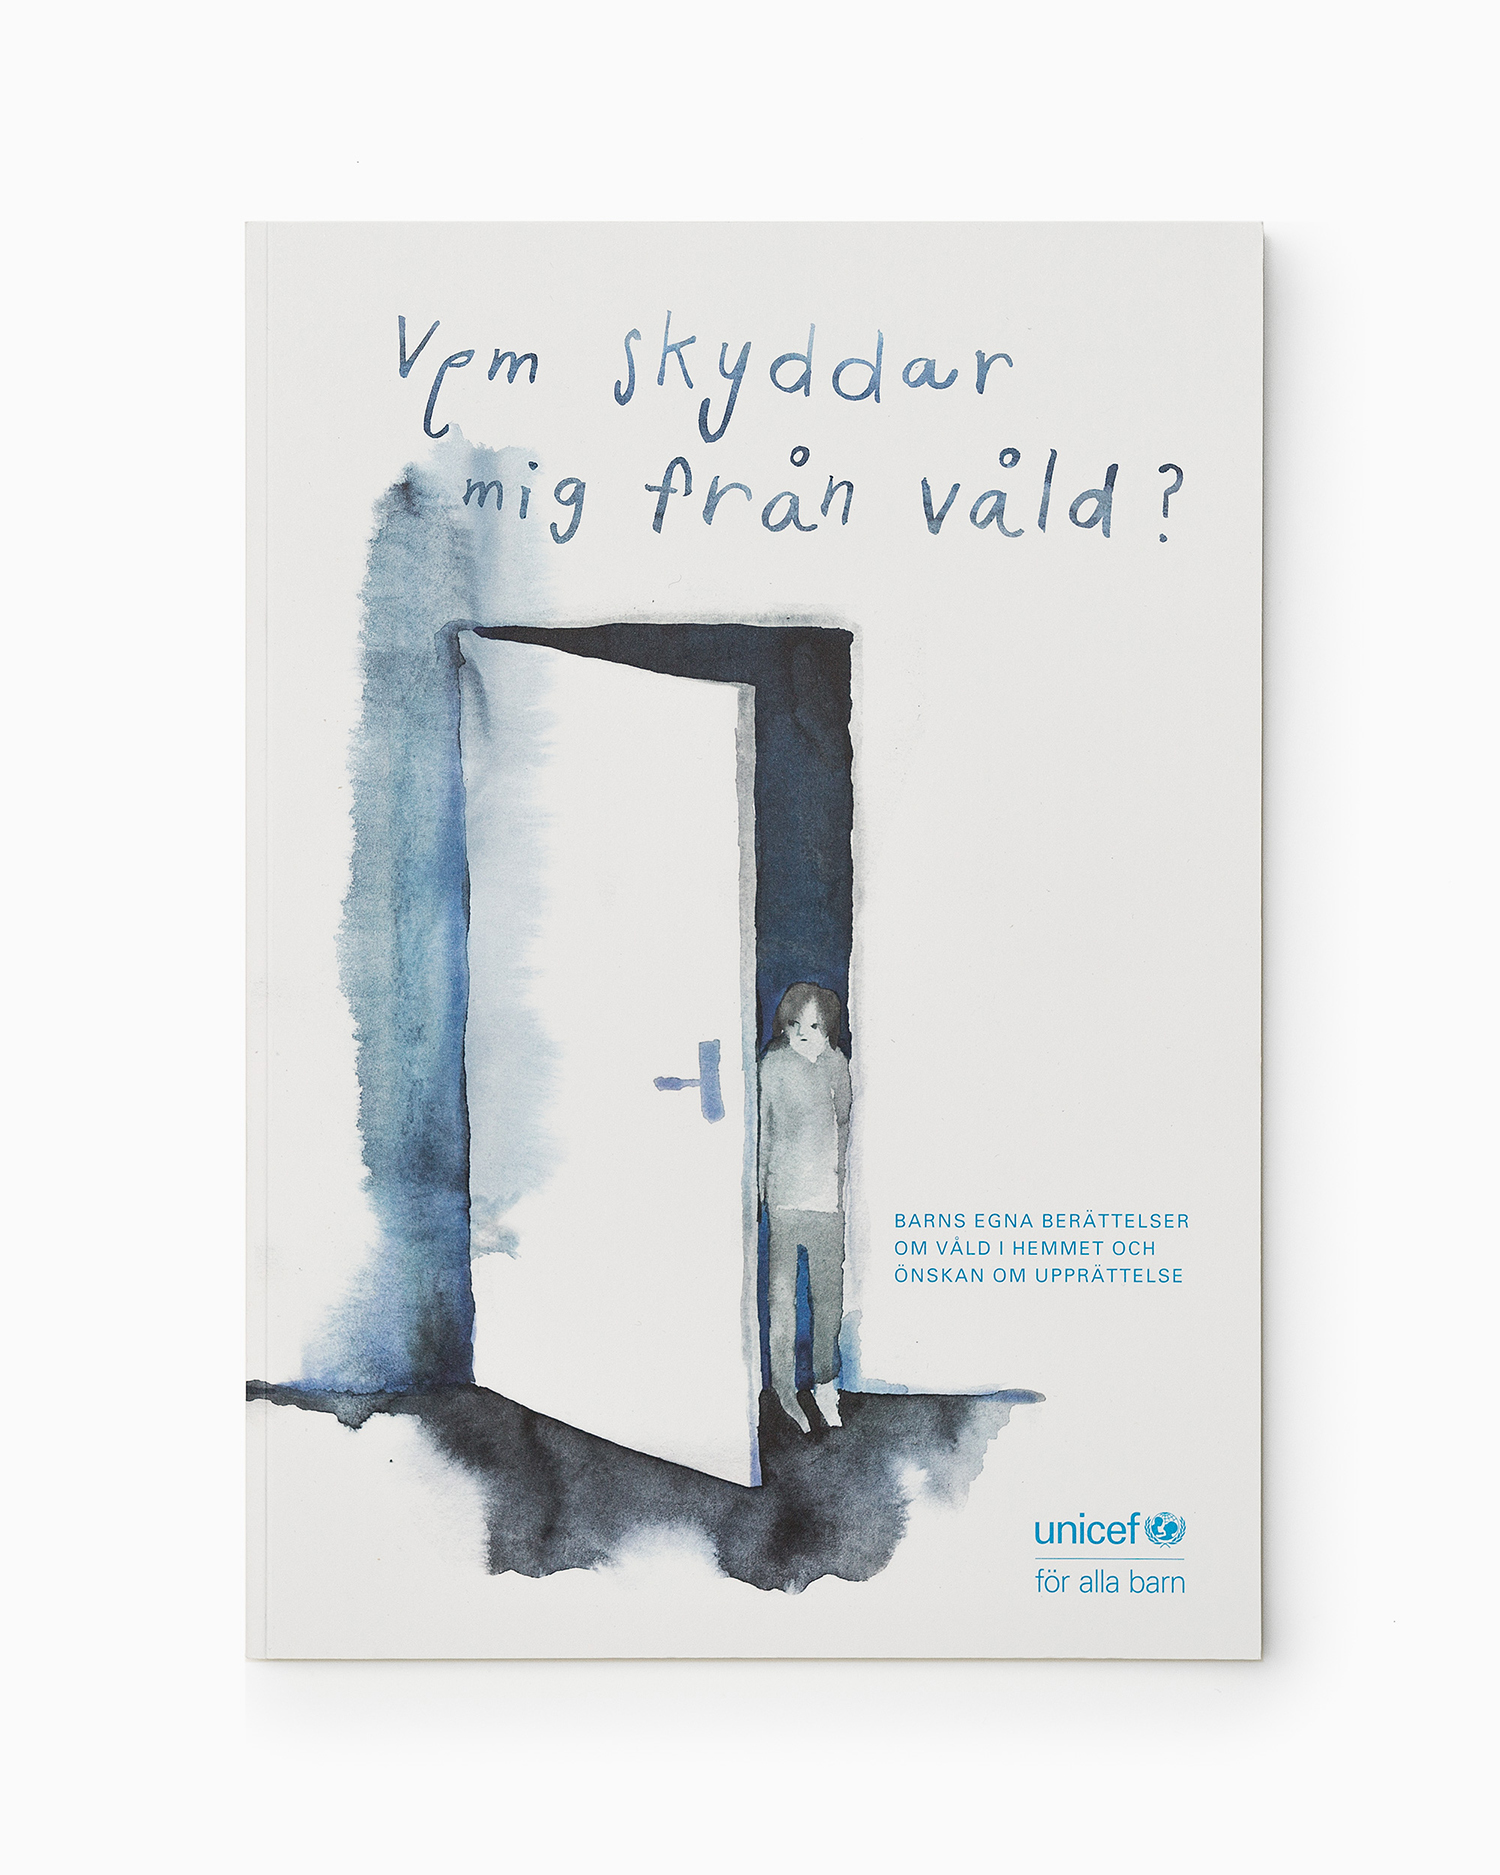 Book Design Inspiration – Who Protects Me From Violence? by Bedow, Sweden